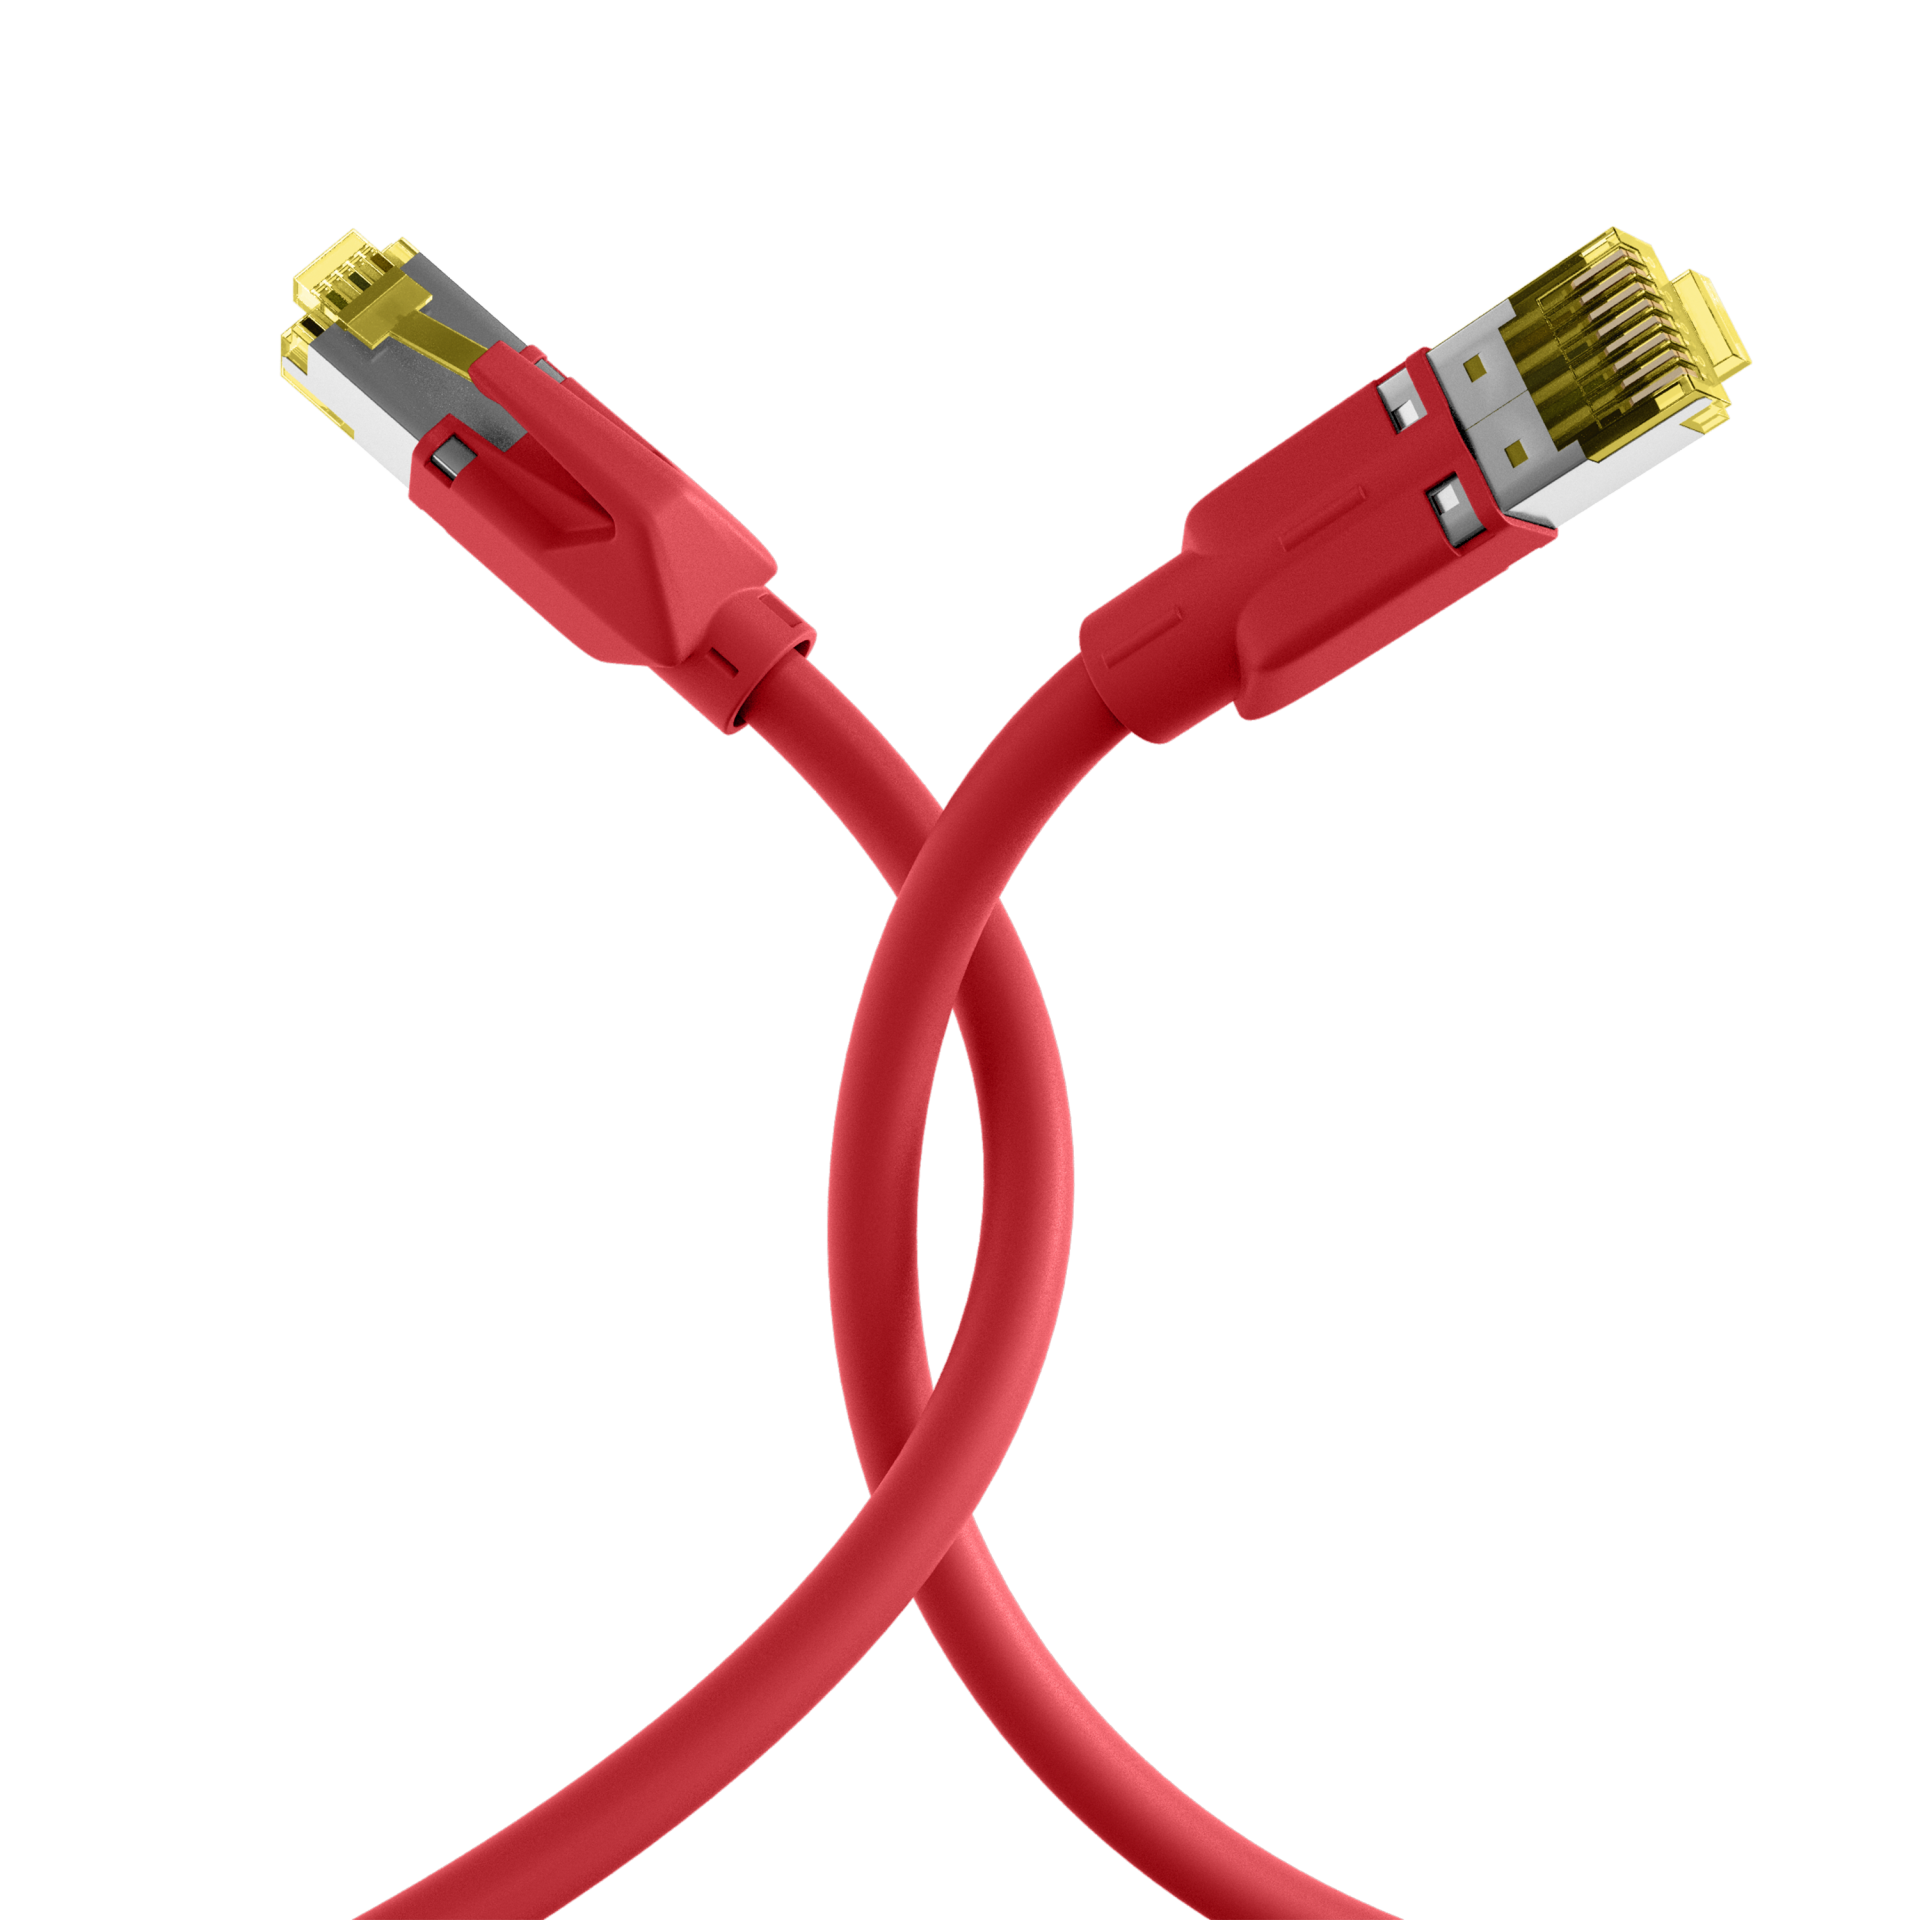 INFRALAN® RJ45 patch cord S/FTP, Cat.6A, TM31, UC900, 1m, red